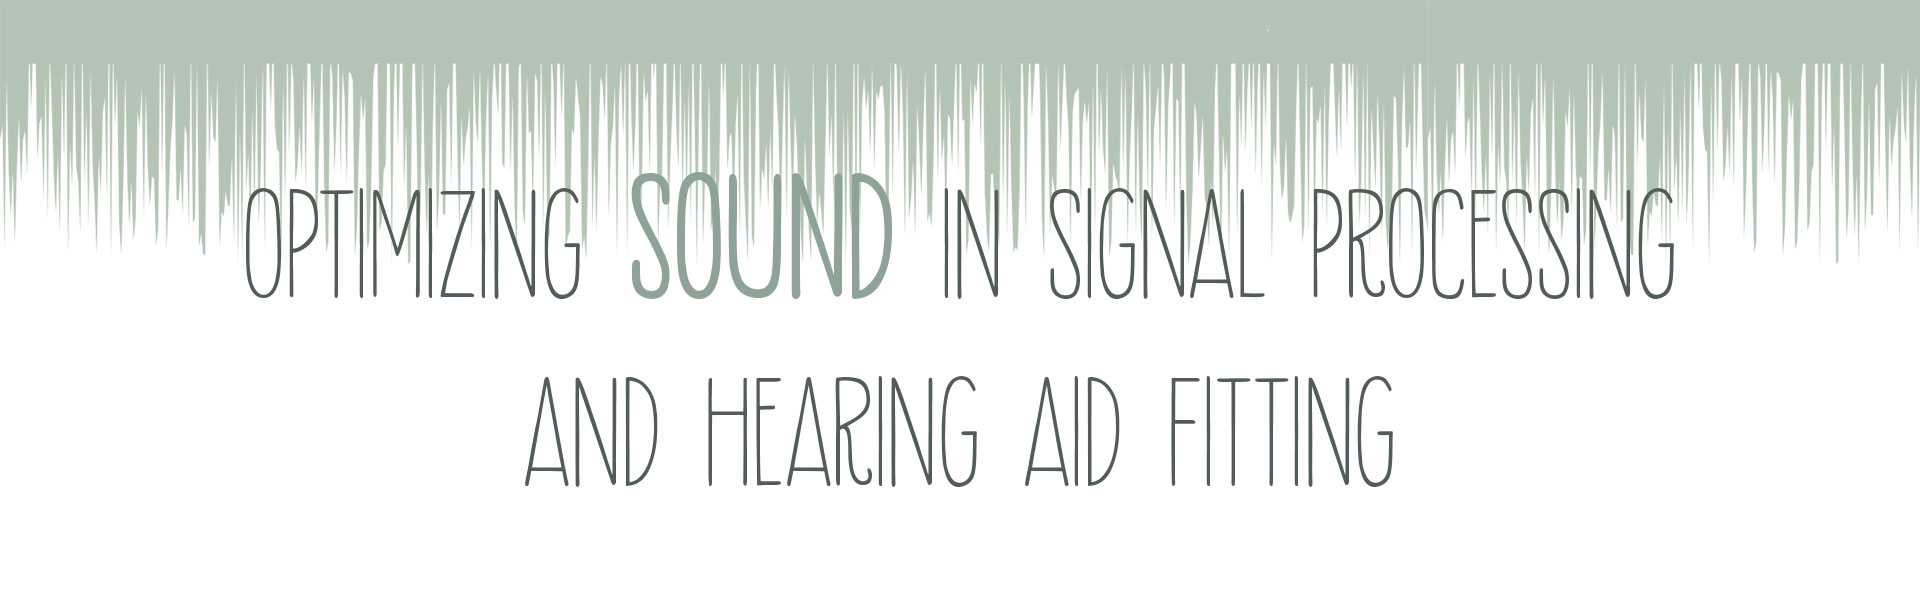 Optimizing Sound in Signal Processing and Hearing Aid Fitting